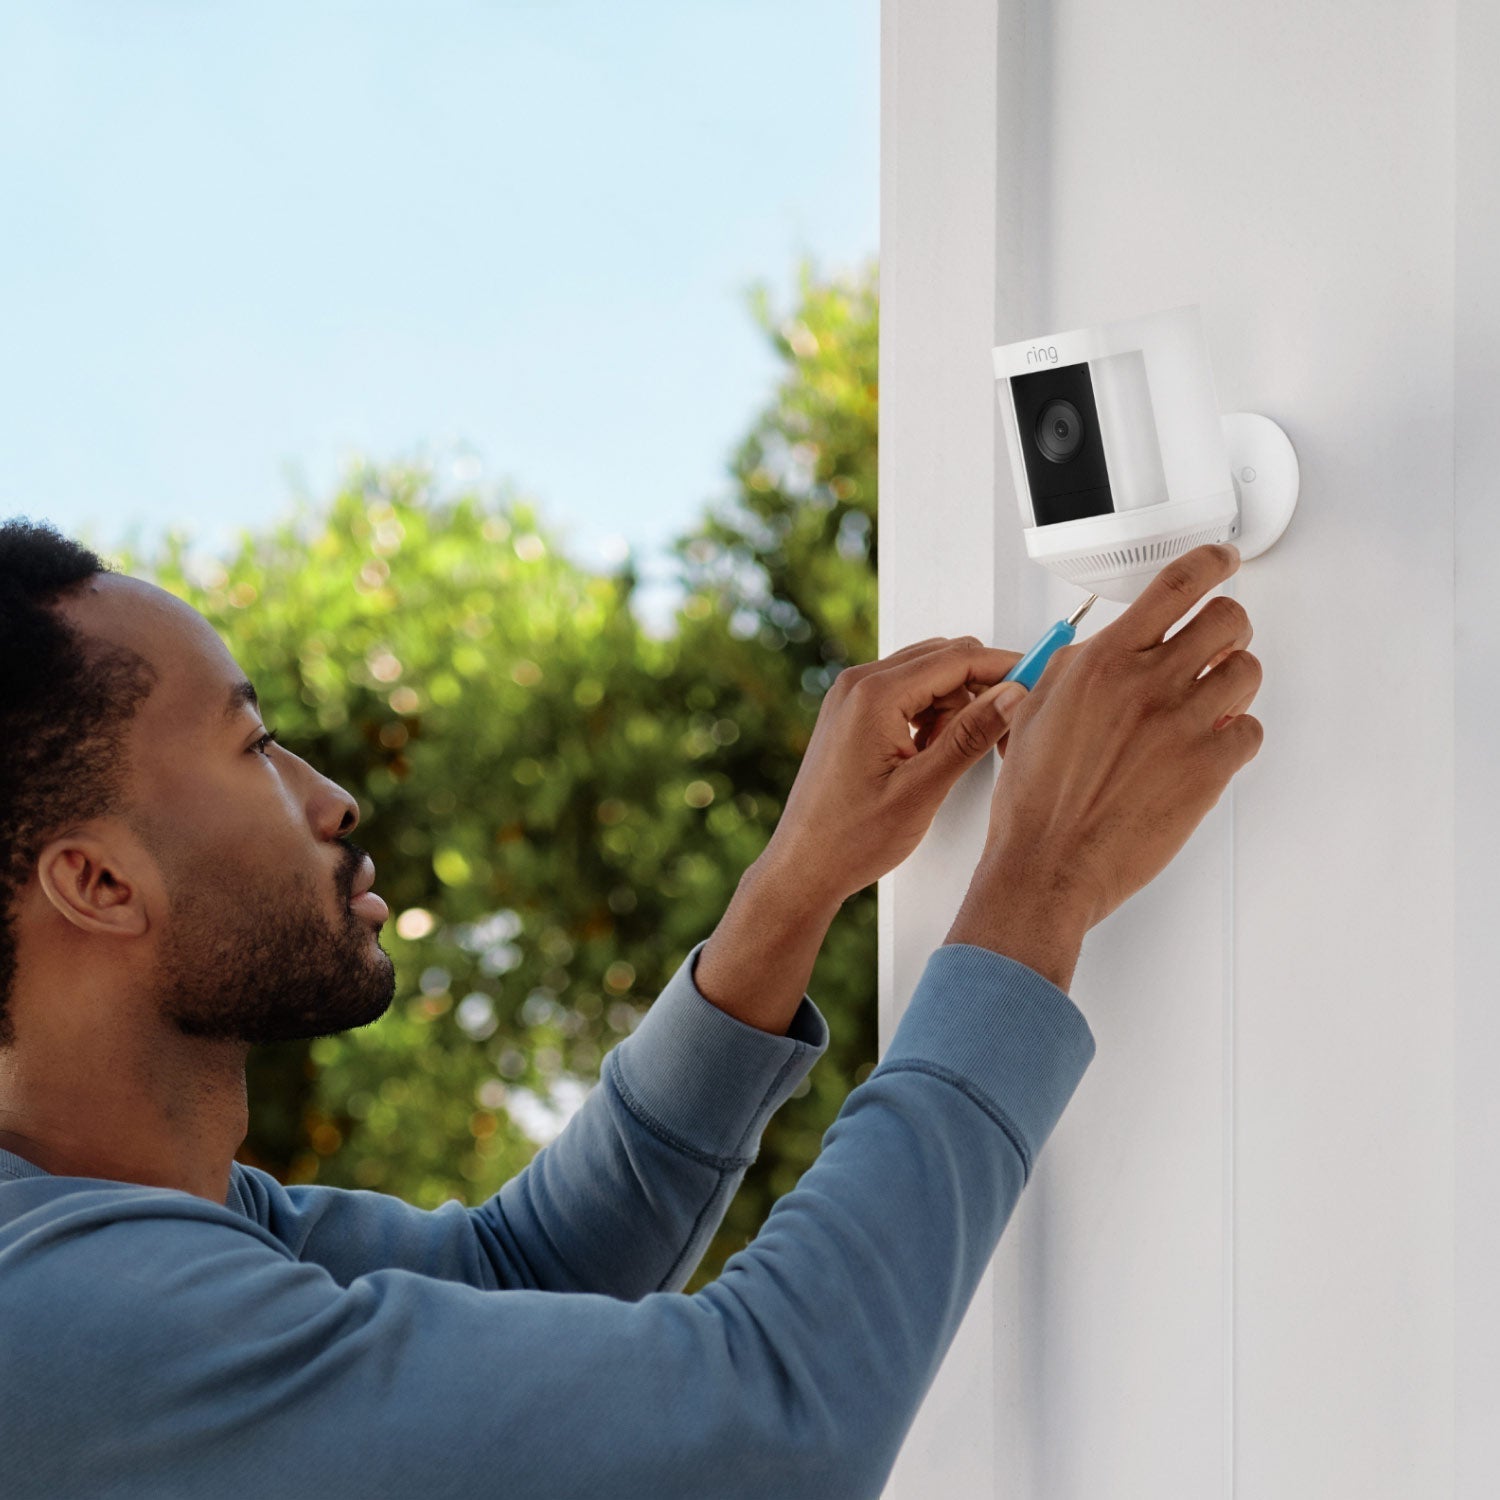 3-Pack Spotlight Cam Plus (Plug-In) - Man installing Spotlight Cam Plus, Plug-In model in white on exterior wall of home.